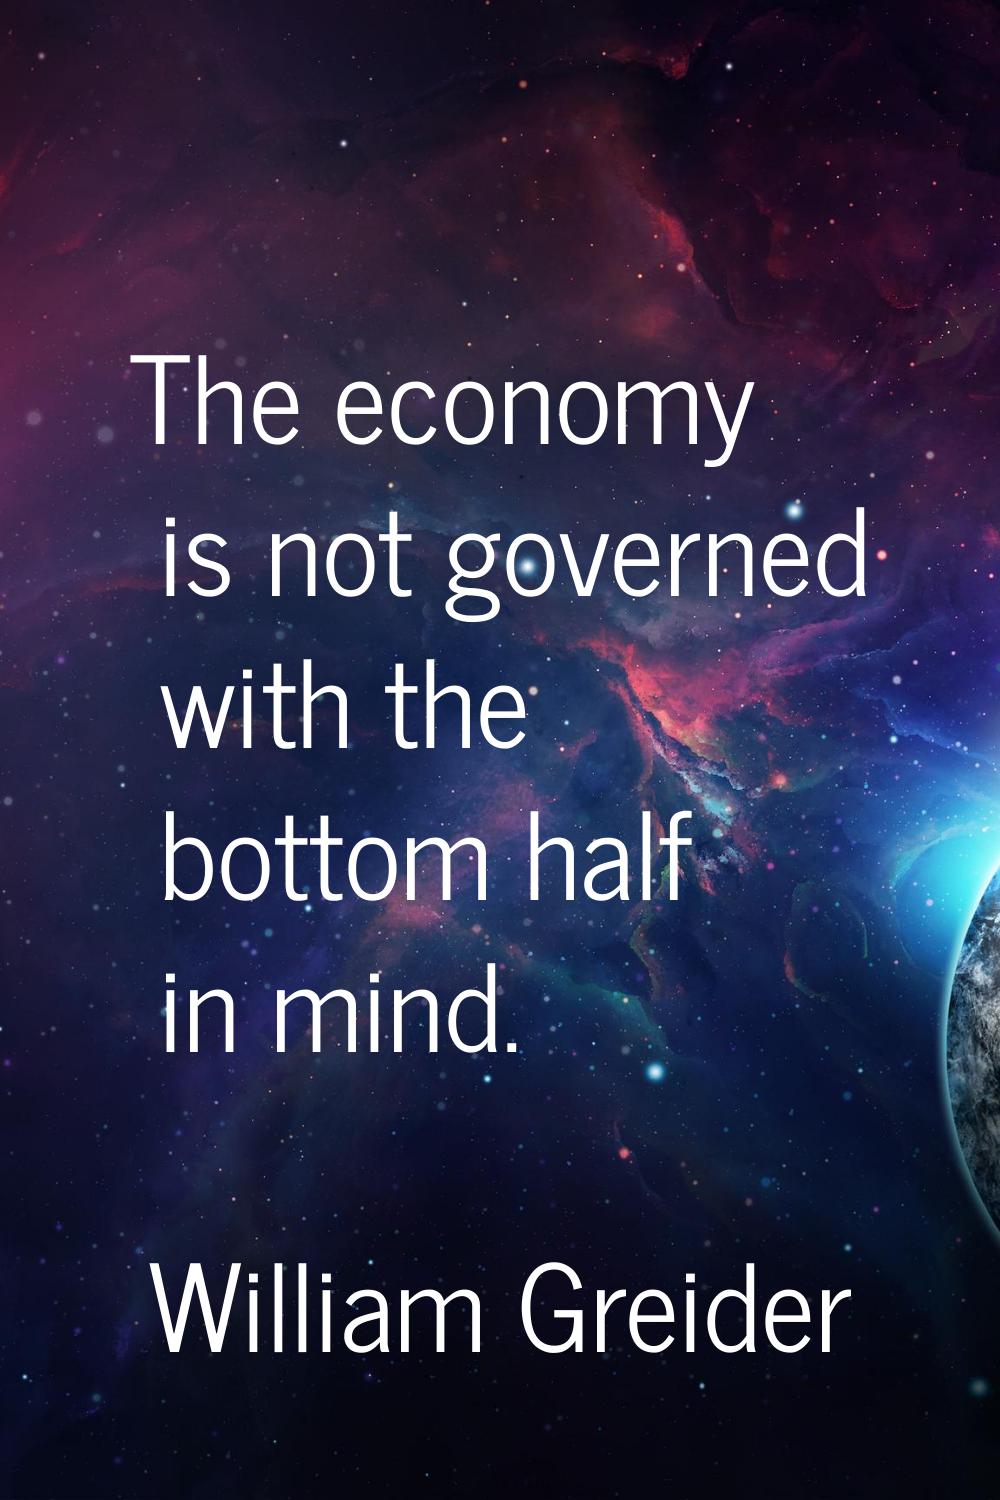 The economy is not governed with the bottom half in mind.